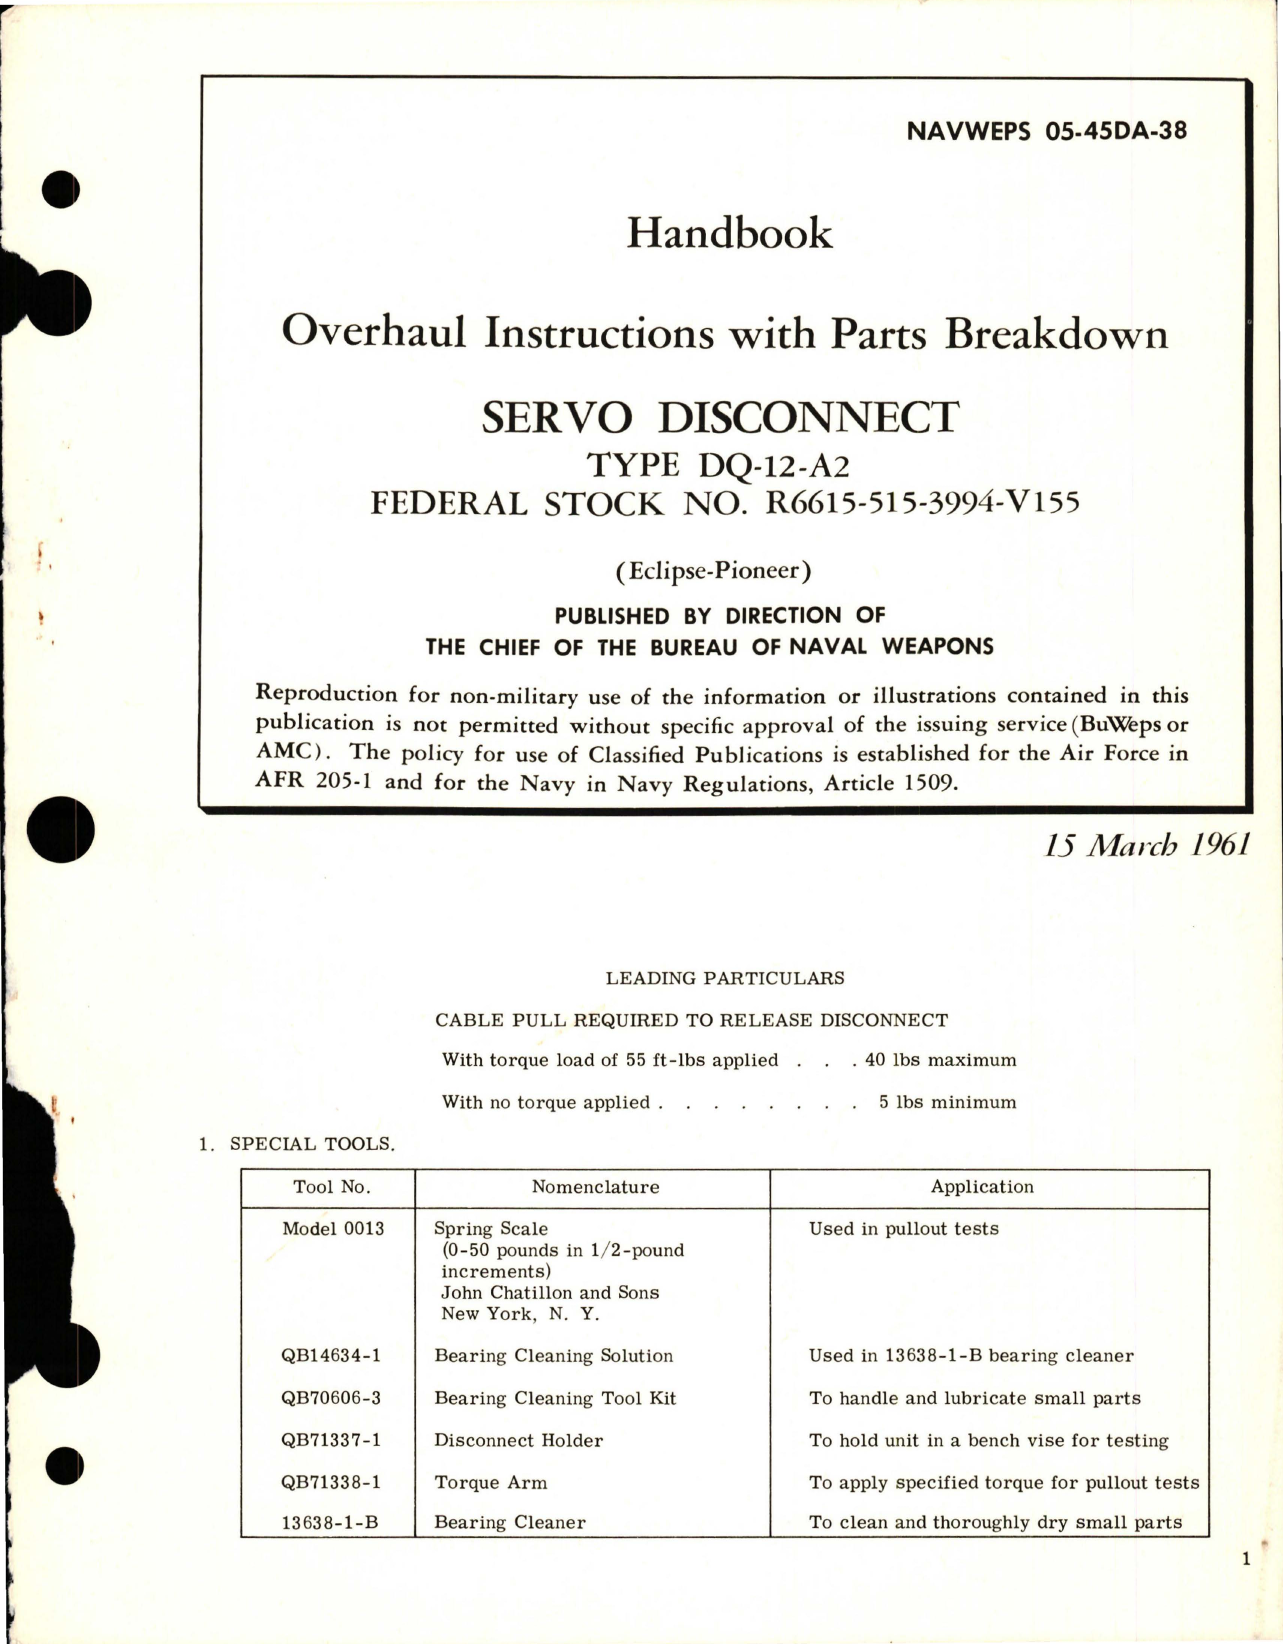 Sample page 1 from AirCorps Library document: Overhaul Instructions with Parts Breakdown for Servo Disconnect - Type DQ-12-A2